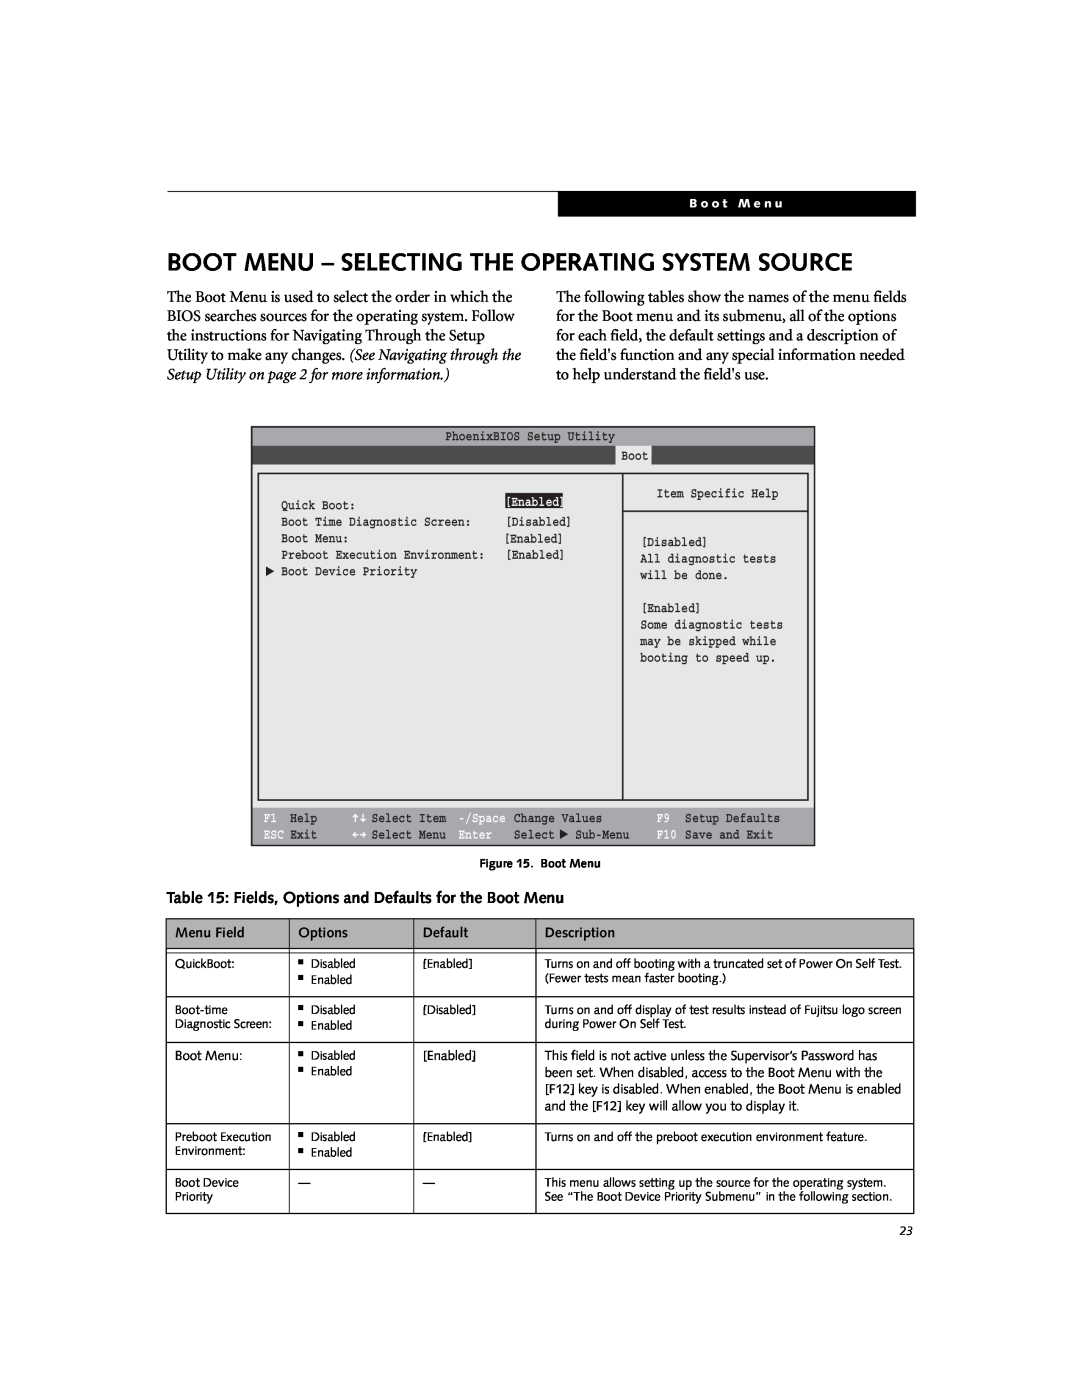 Fujitsu V1010 Boot Menu - Selecting The Operating System Source, Fields, Options and Defaults for the Boot Menu, ESC Exit 